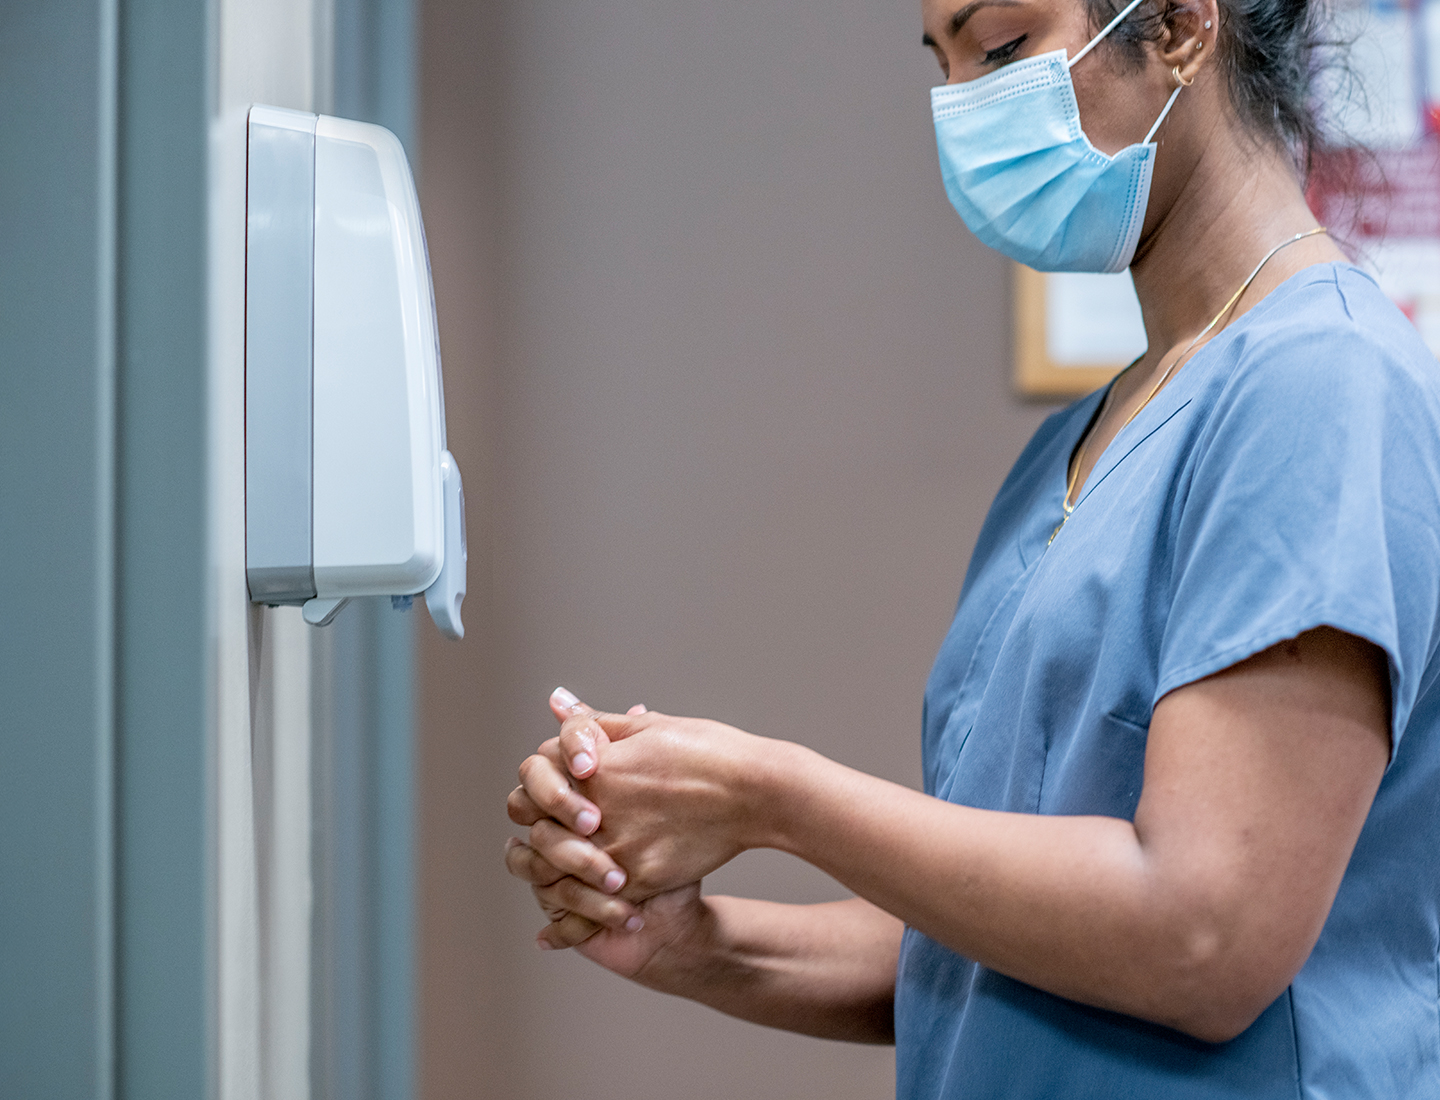 Health care professional disinfects her hands